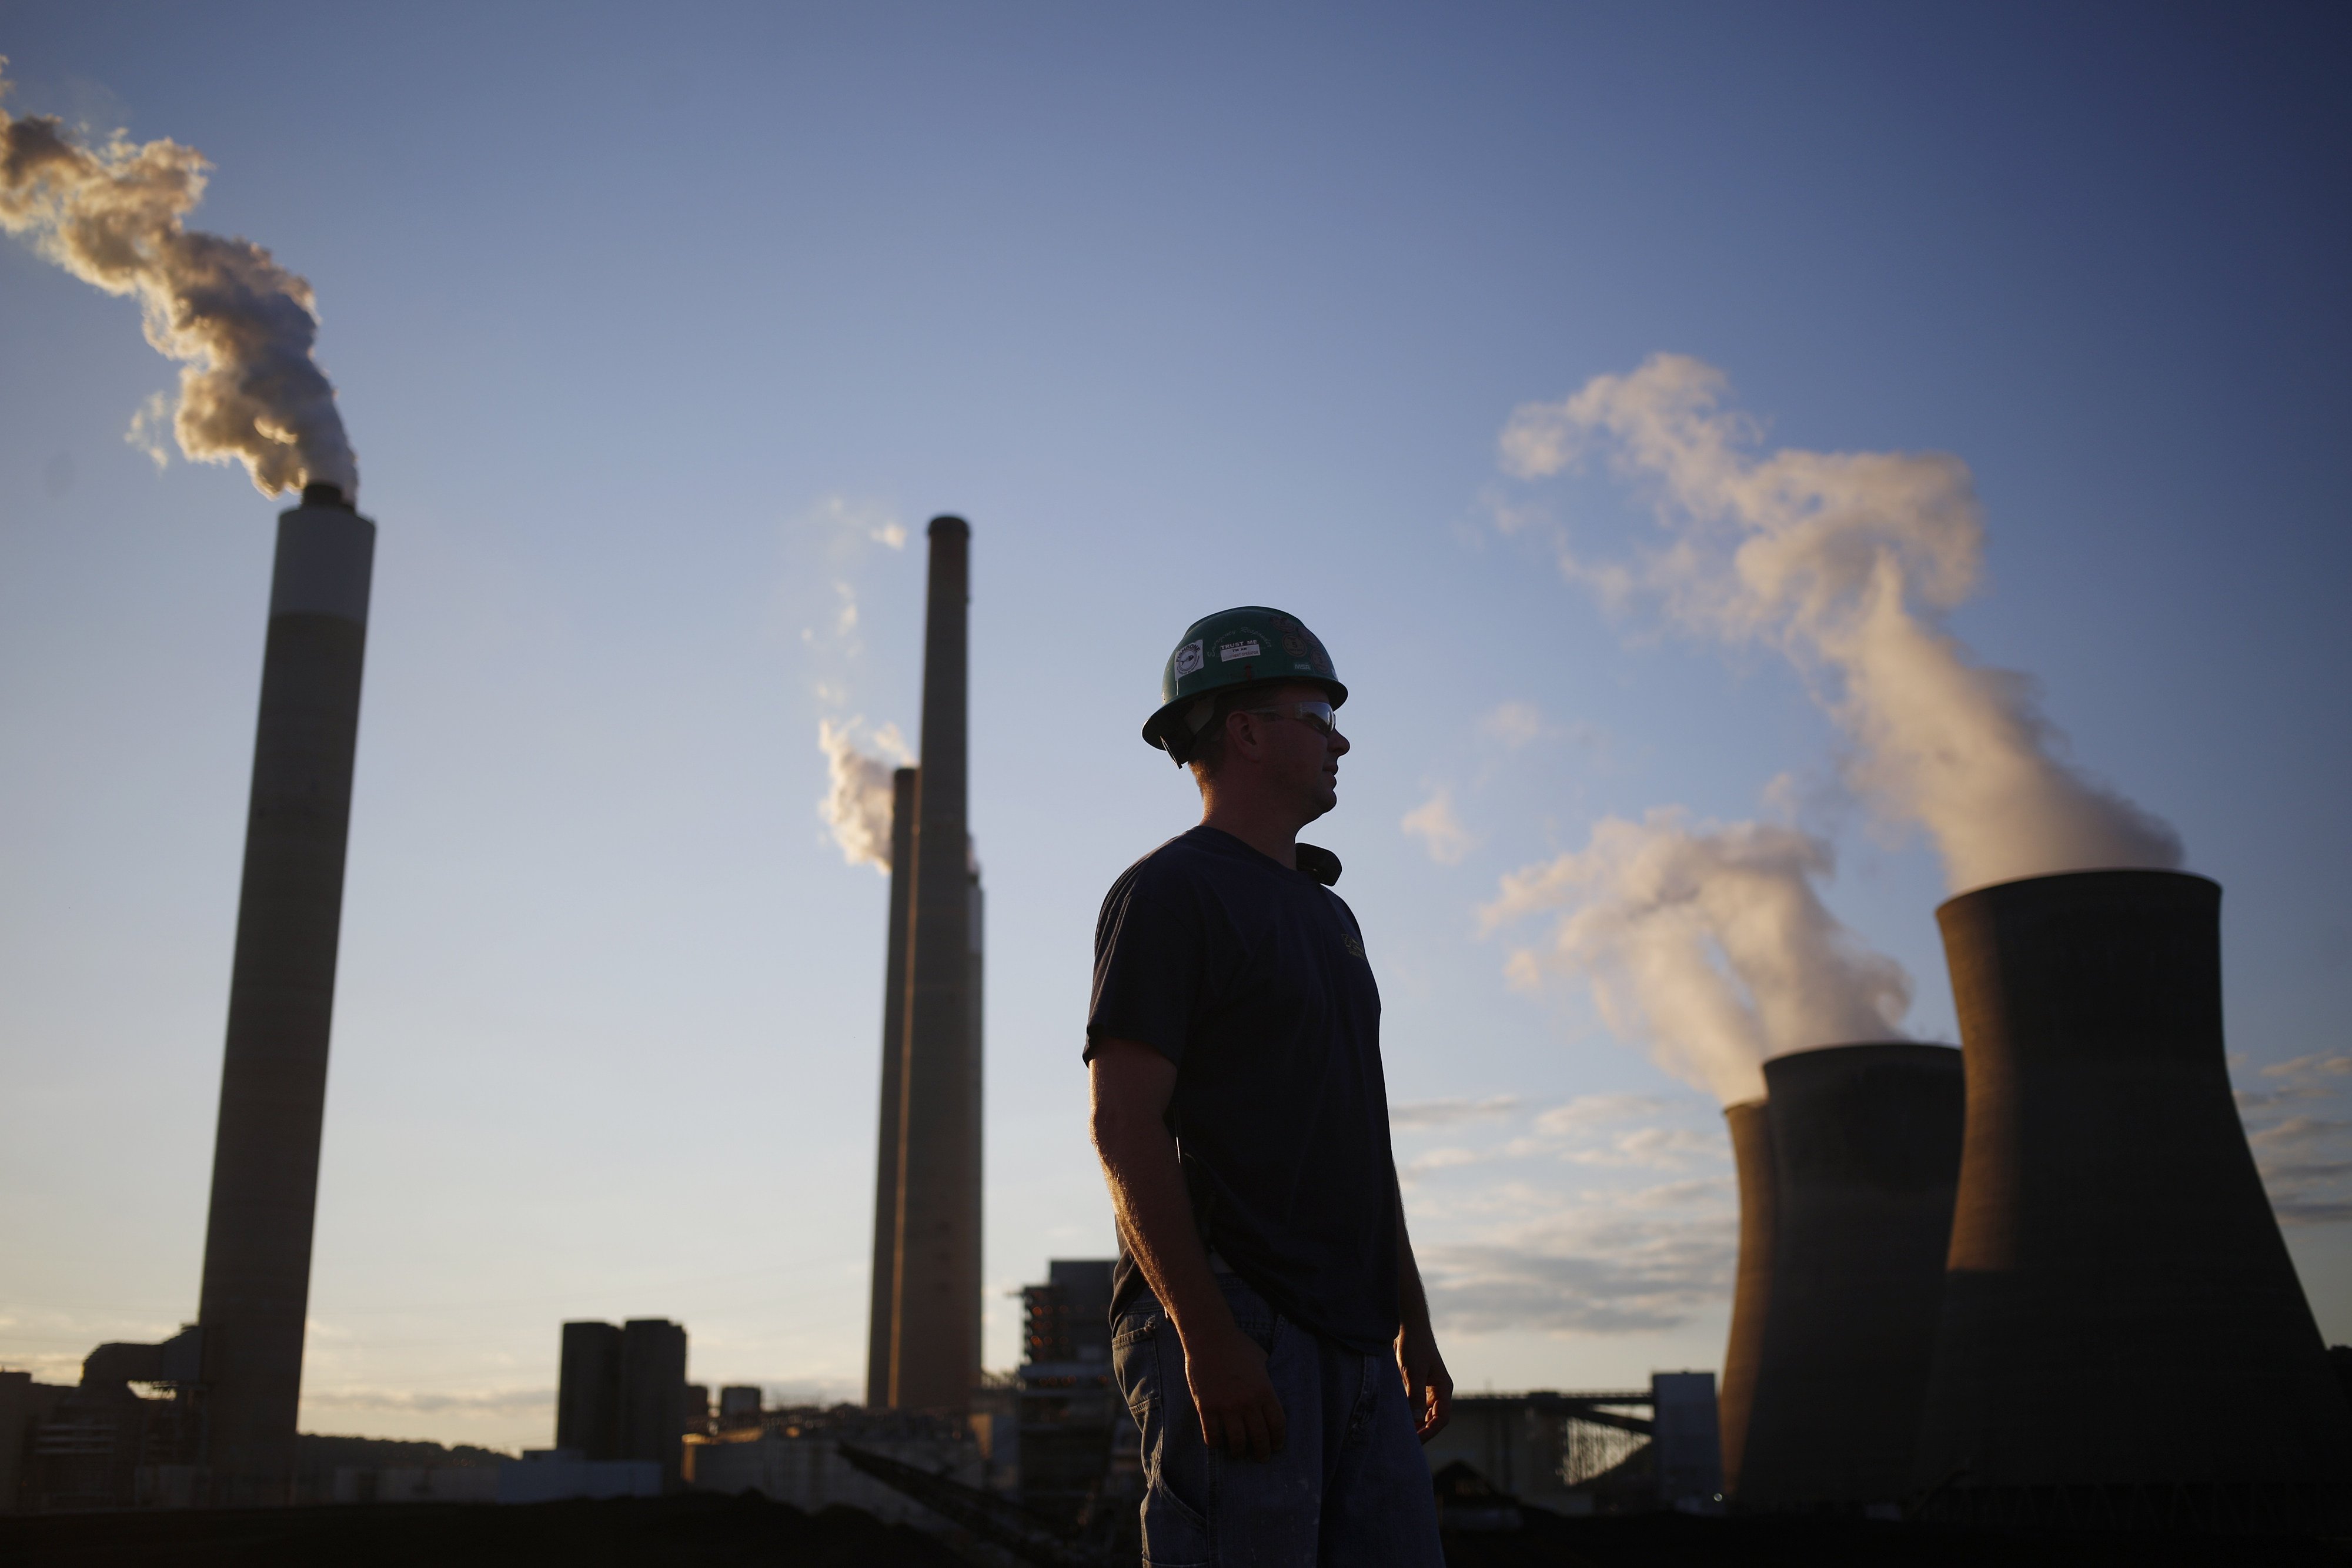 A worker stands in the yard of a coal-fired power station in Winfield, West Virginia, in July 2018. There is an urgent need to replace coal- and oil-fired power generation with renewables or nuclear energy, and to finance the vast transition costs involved. Photo: Bloomberg